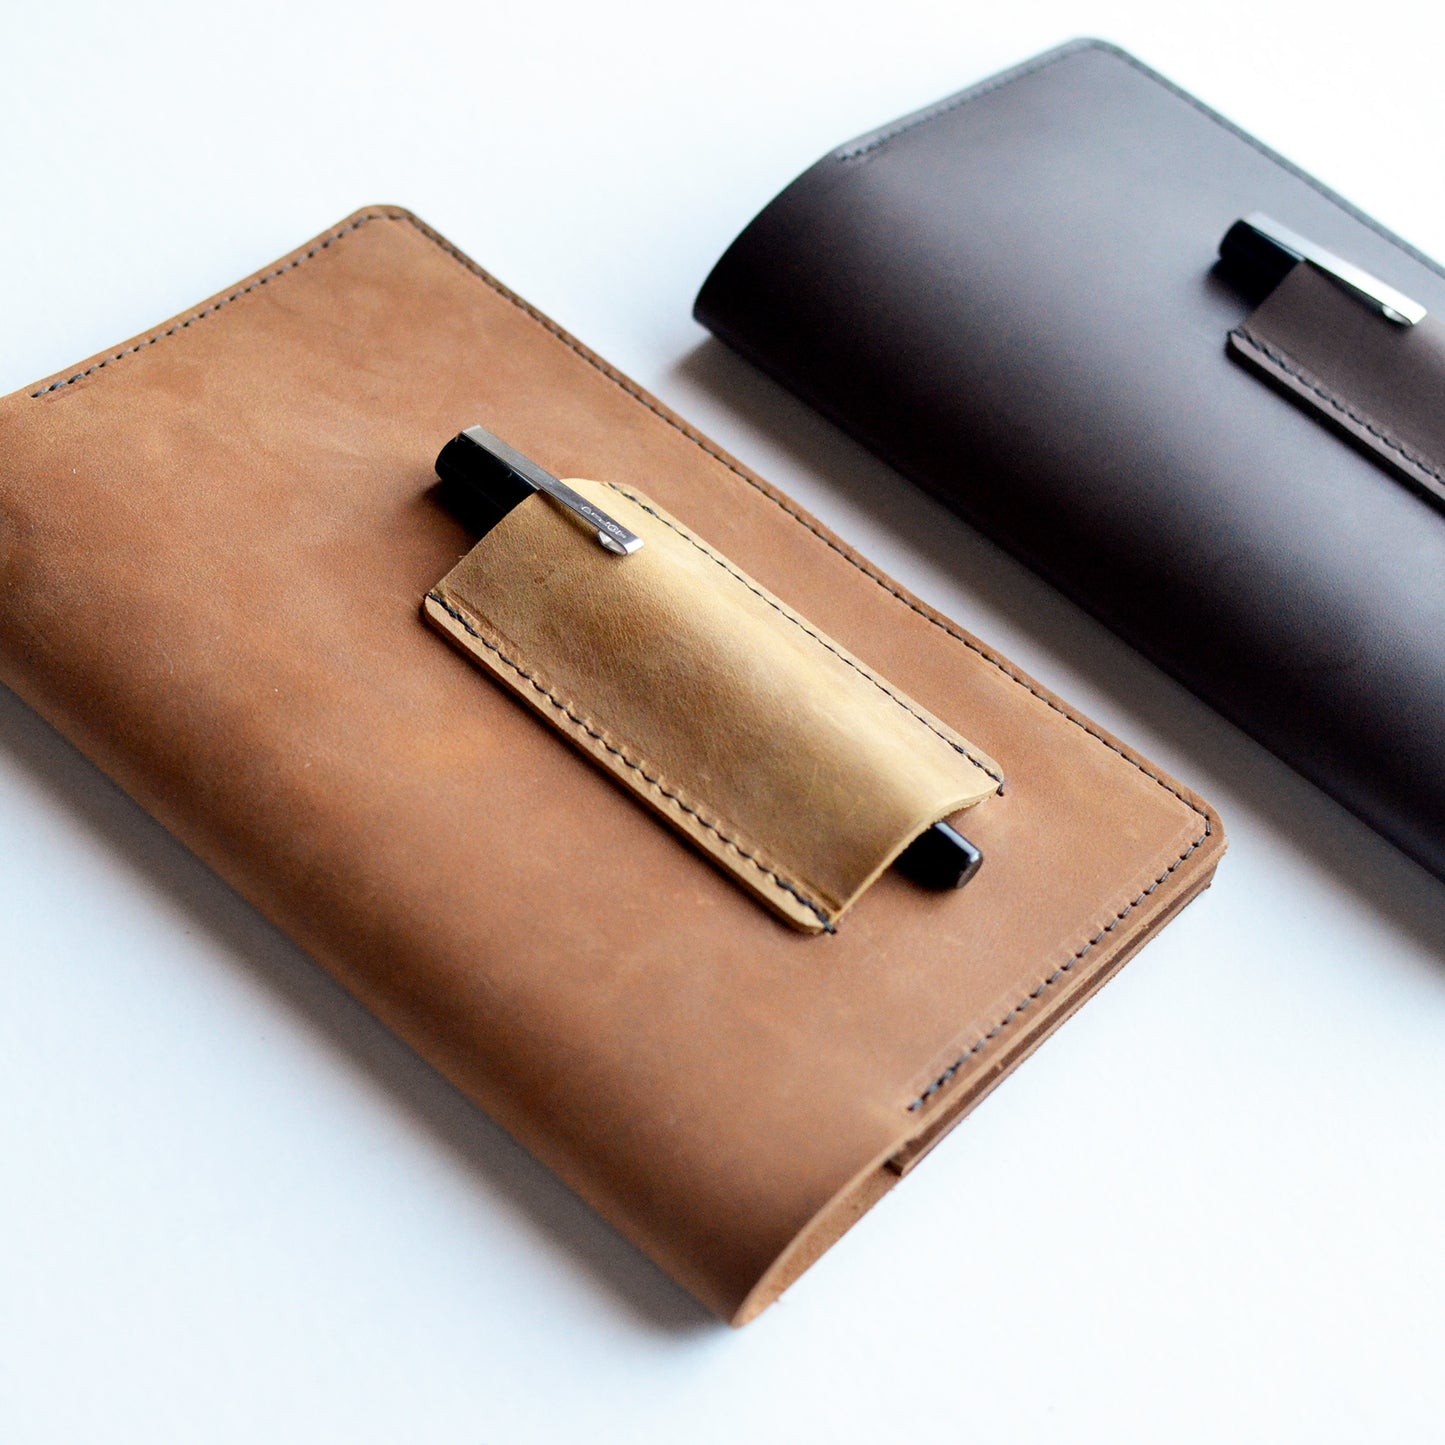 Refillable Leather Journal + Pen - Honey Brown Leather